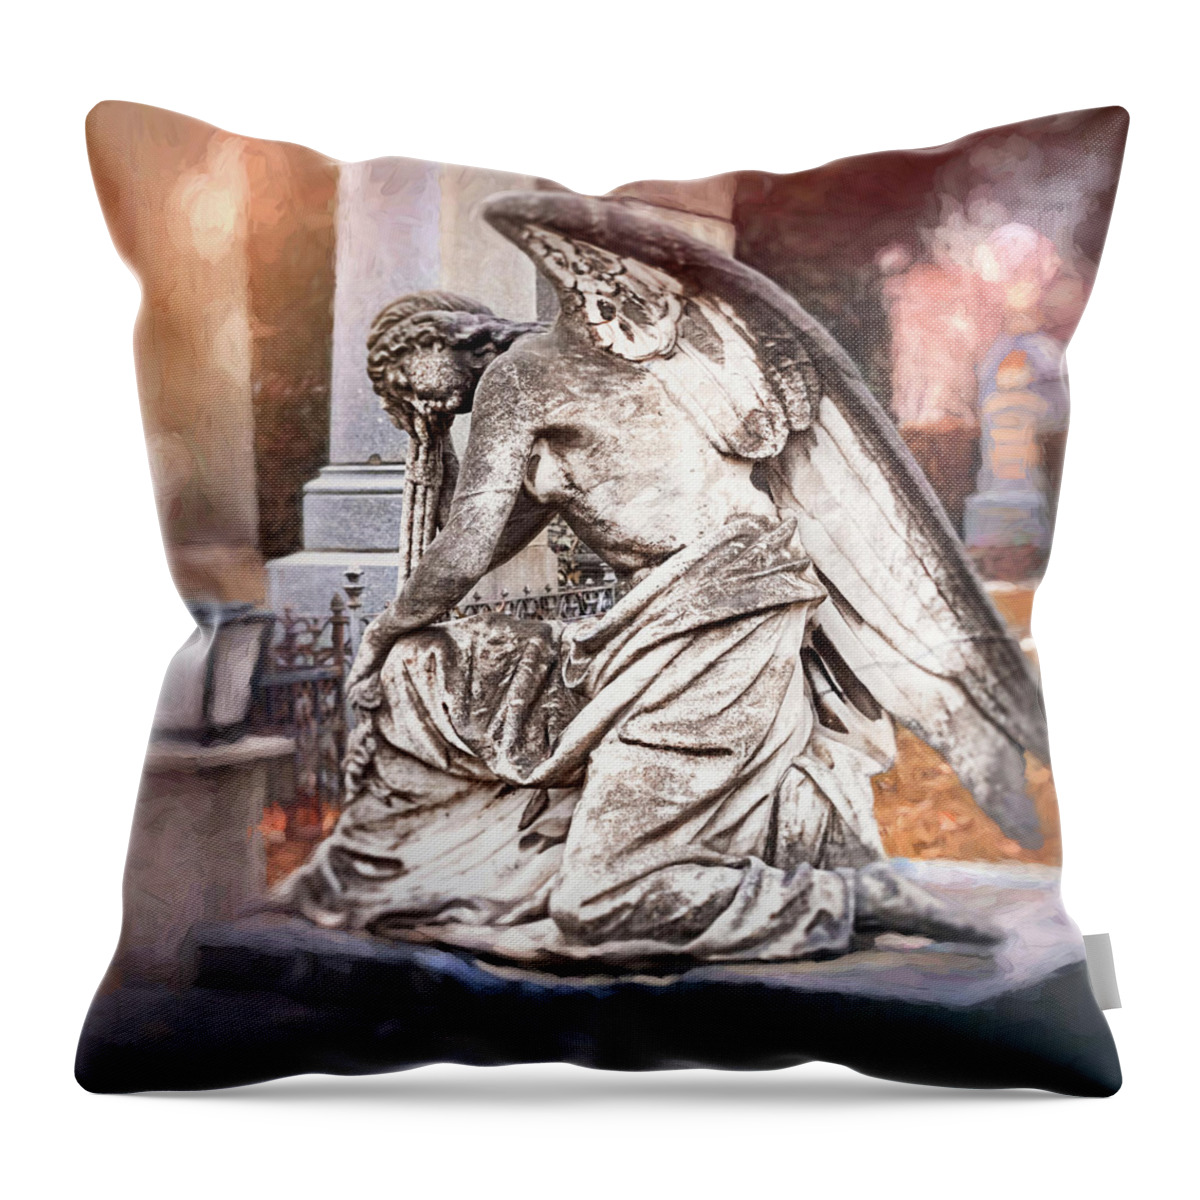 Cemetery Throw Pillow featuring the photograph Mourning Angel Zentralfriedhof Vienna by Carol Japp